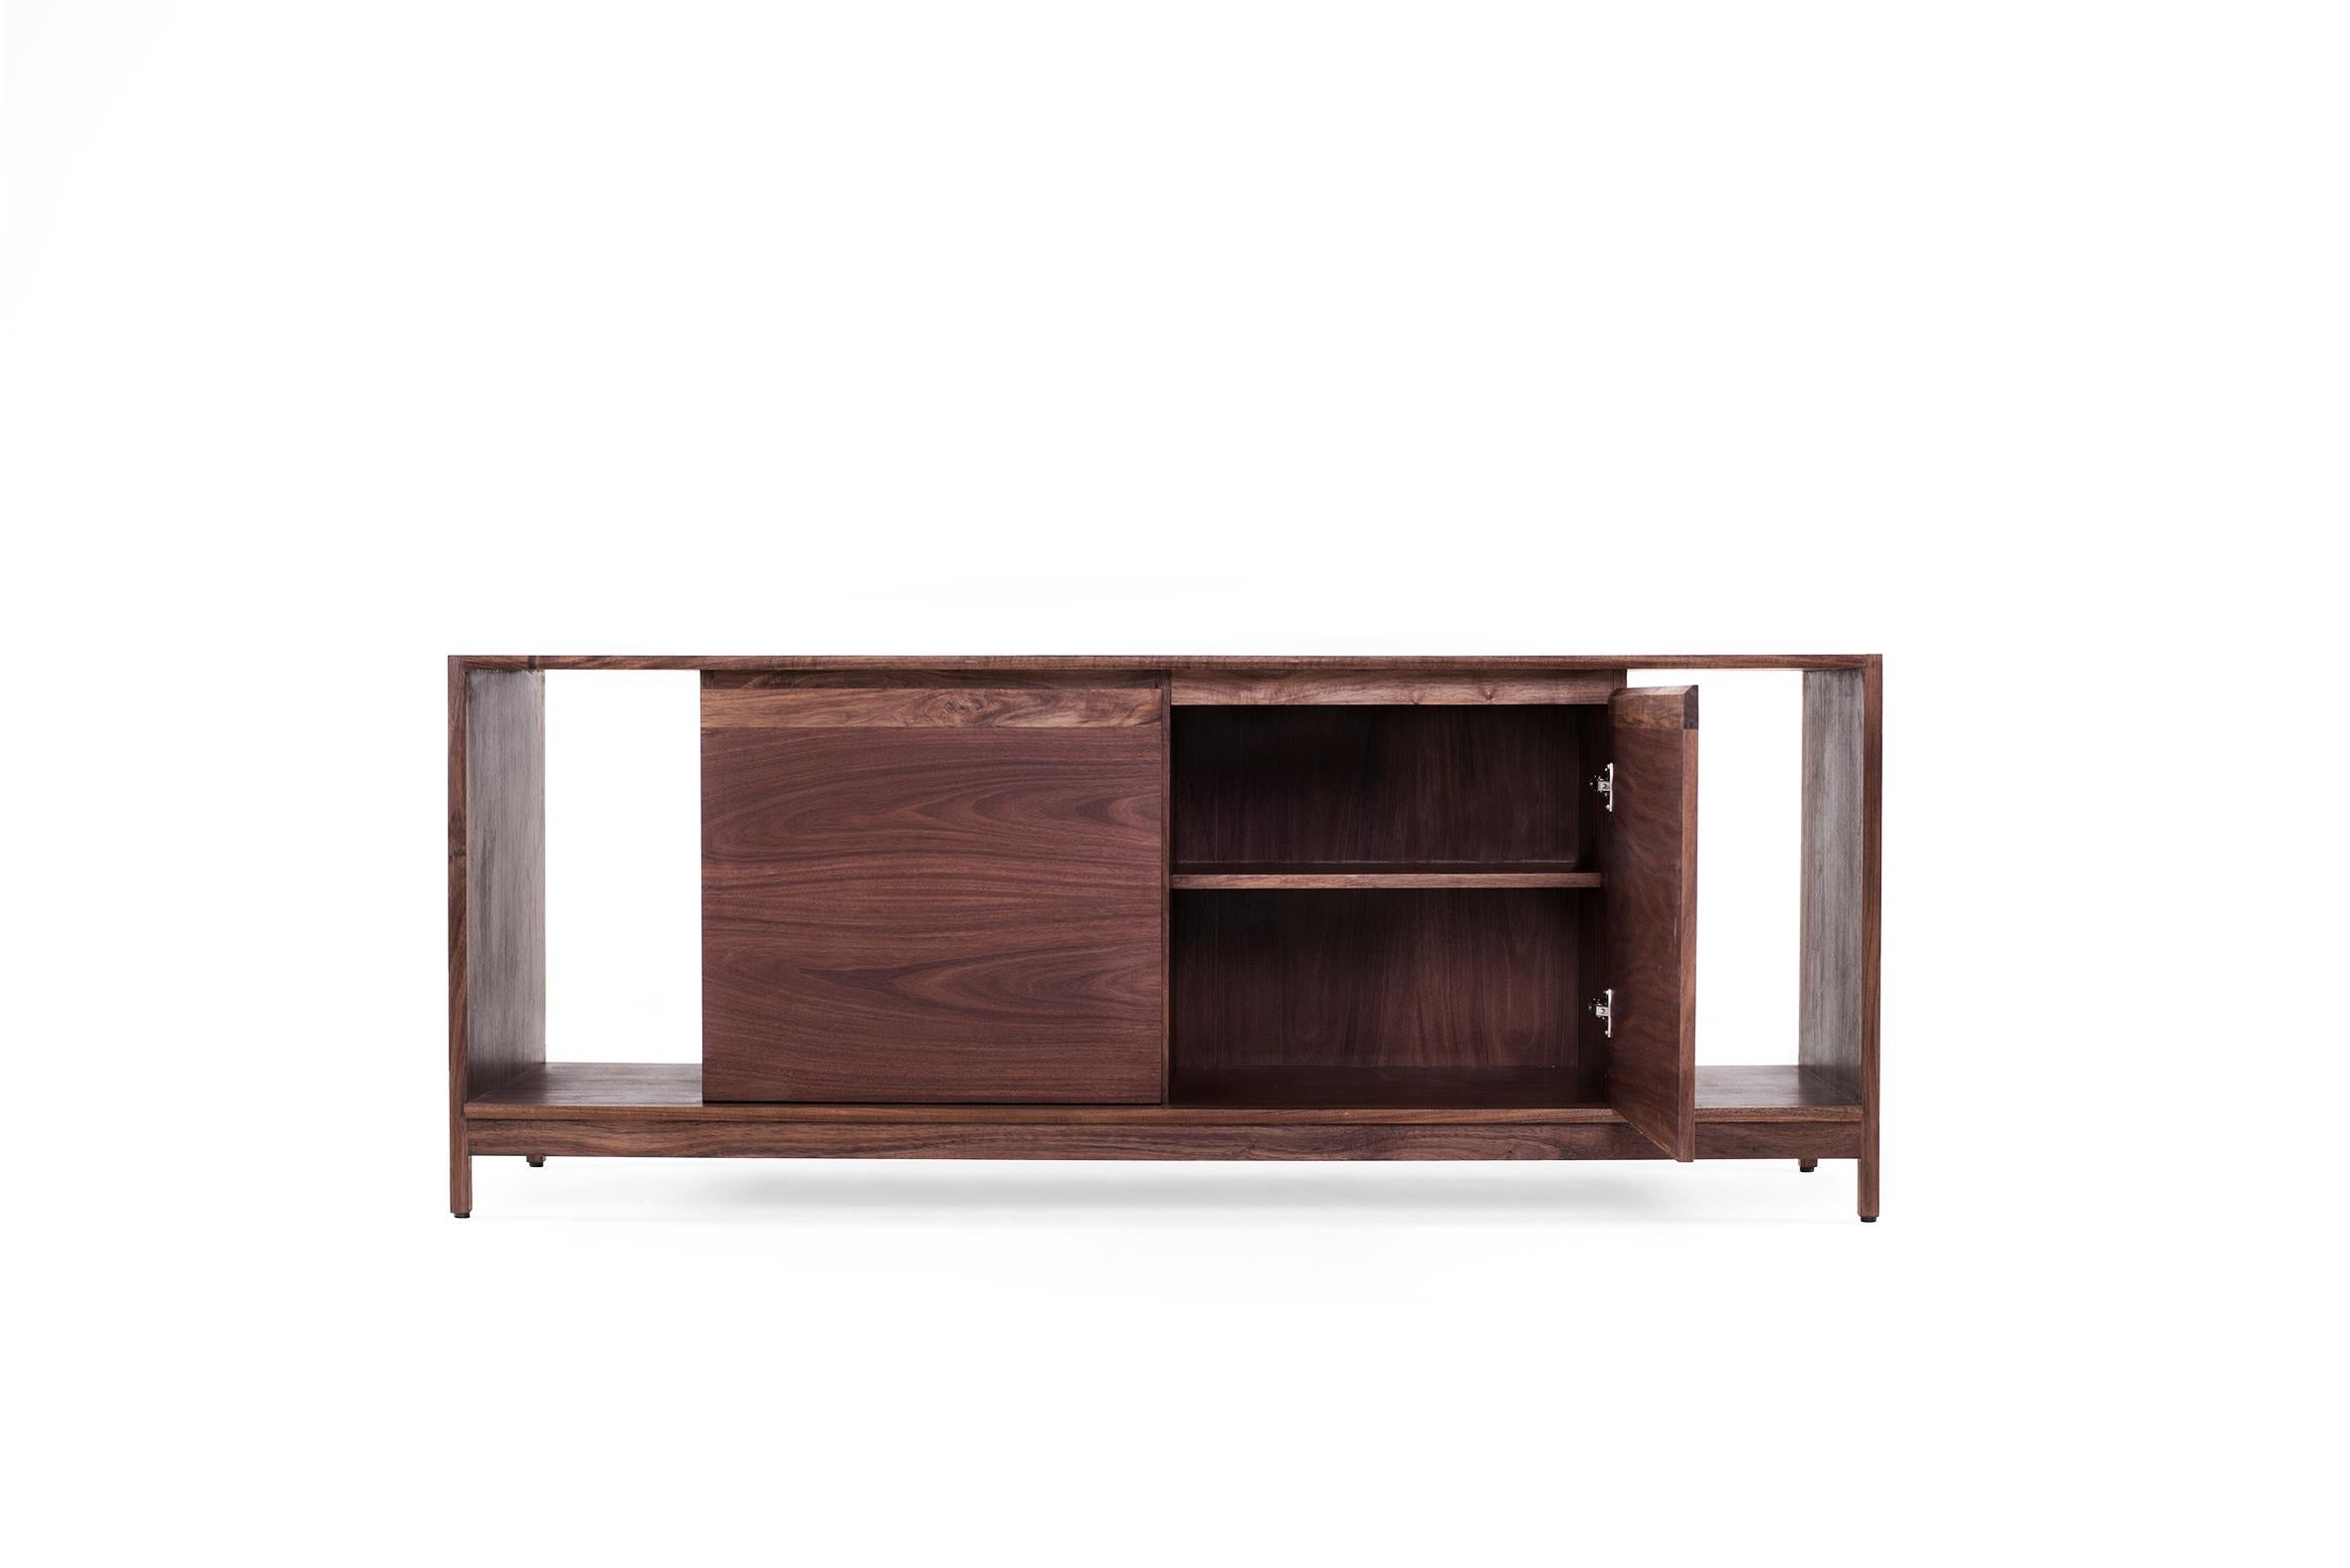 Introducing the Dedo Collection's latest addition, the Dedo TV Stand. This Mexican contemporary TV stand by Emiliano Molina for CUCHARA is a perfect example of the collection's design philosophy. The Dedo TV Stand features a simple yet elegant